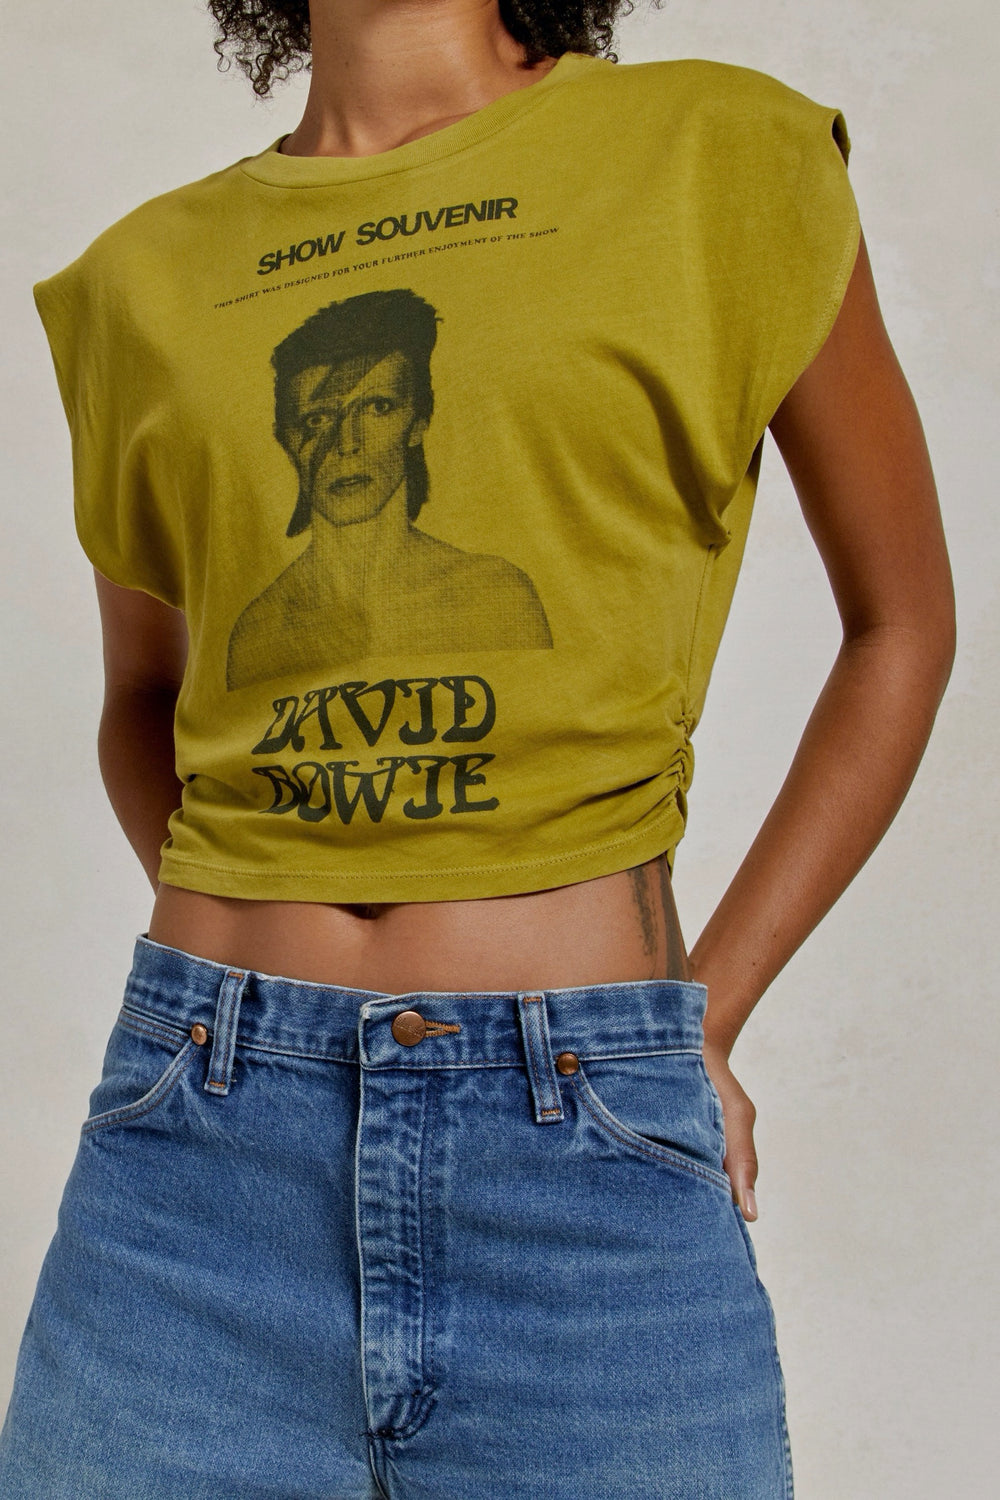 David Bowie Show Flyer Banded Tee